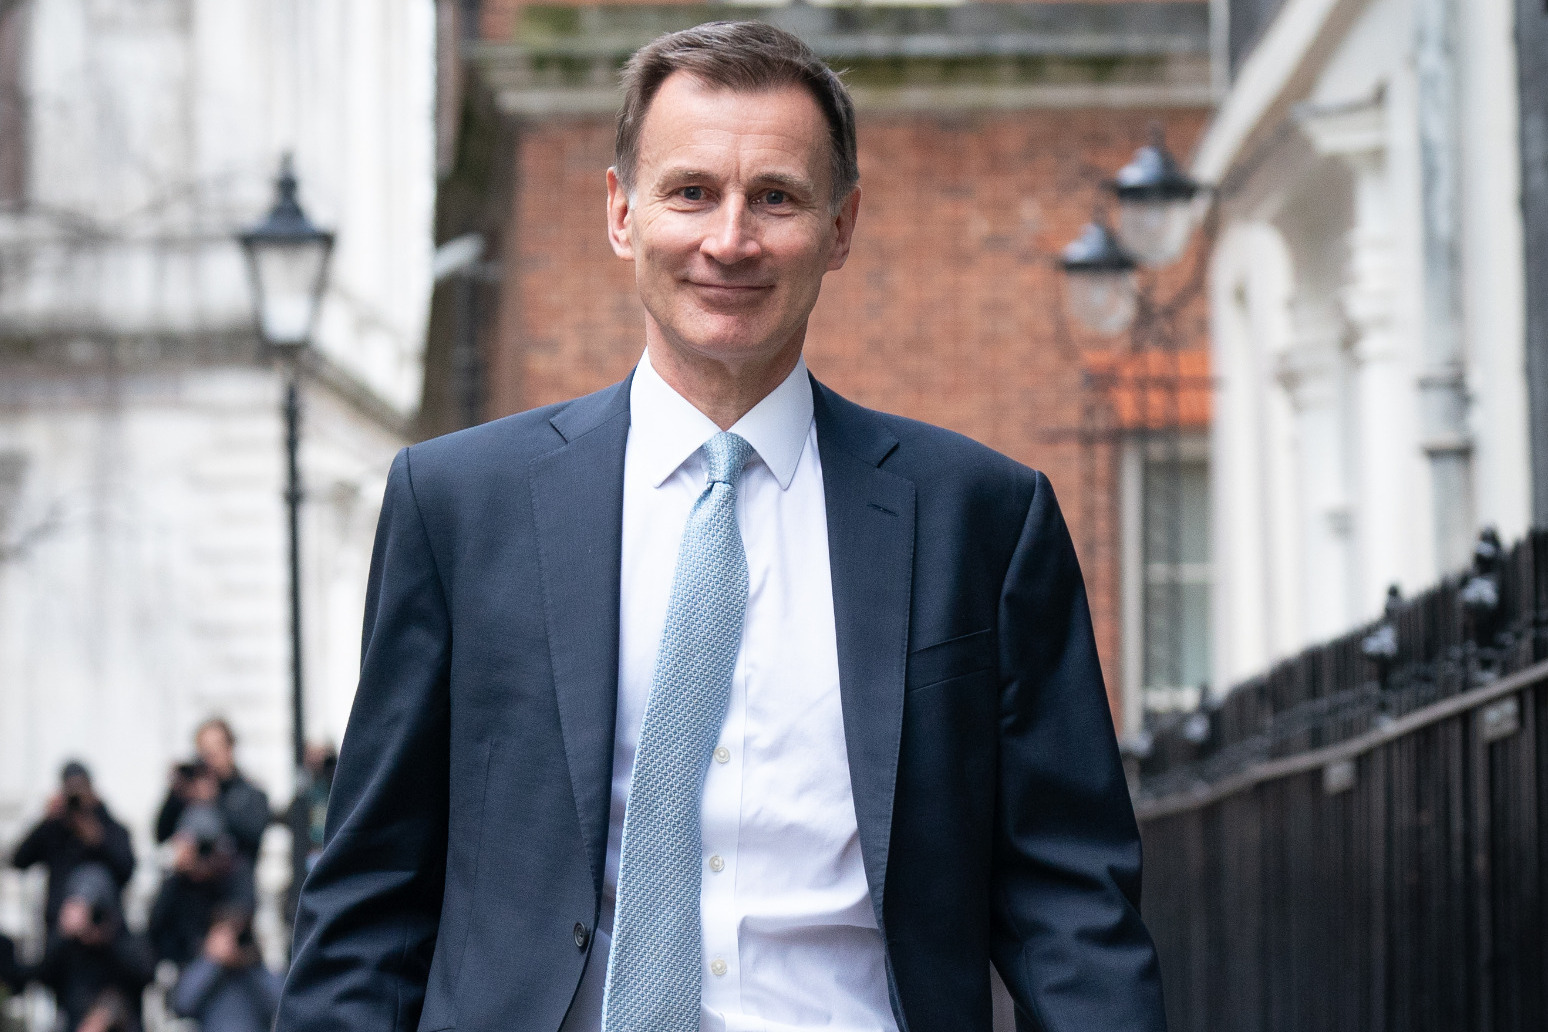 Hunt to insist UK economy ‘is on the up’ 